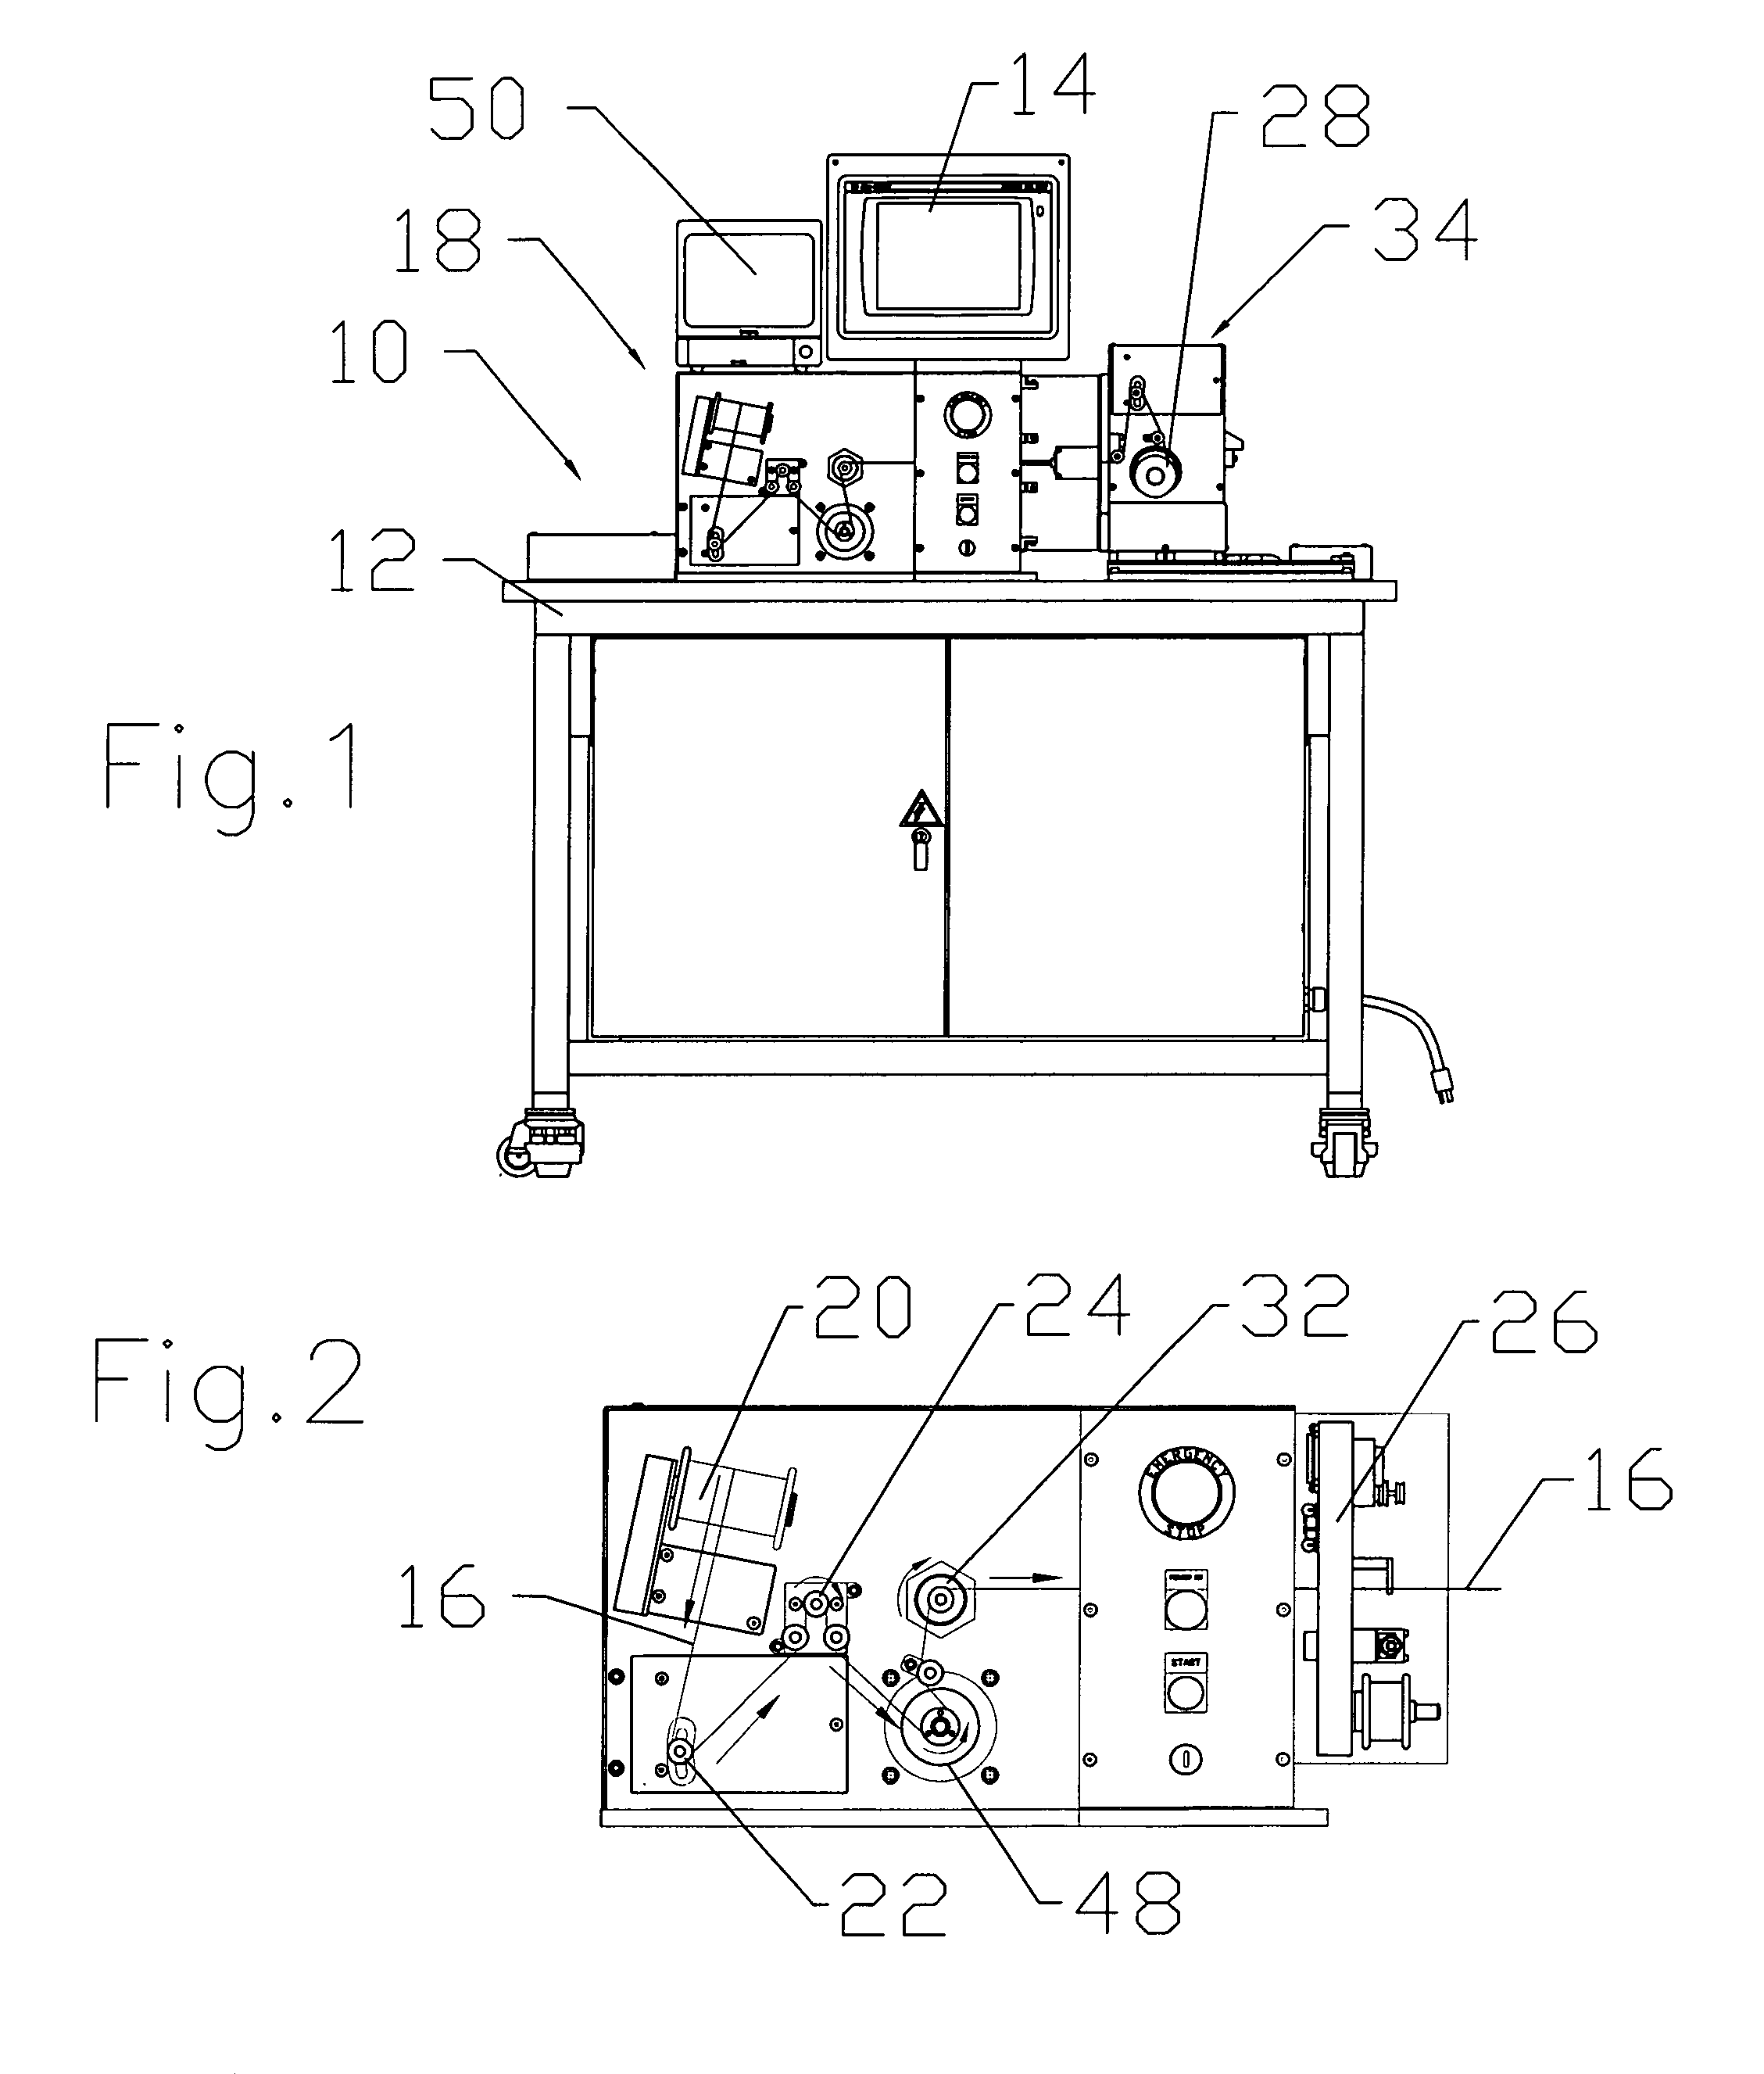 Tension control system for a continuous winding machine